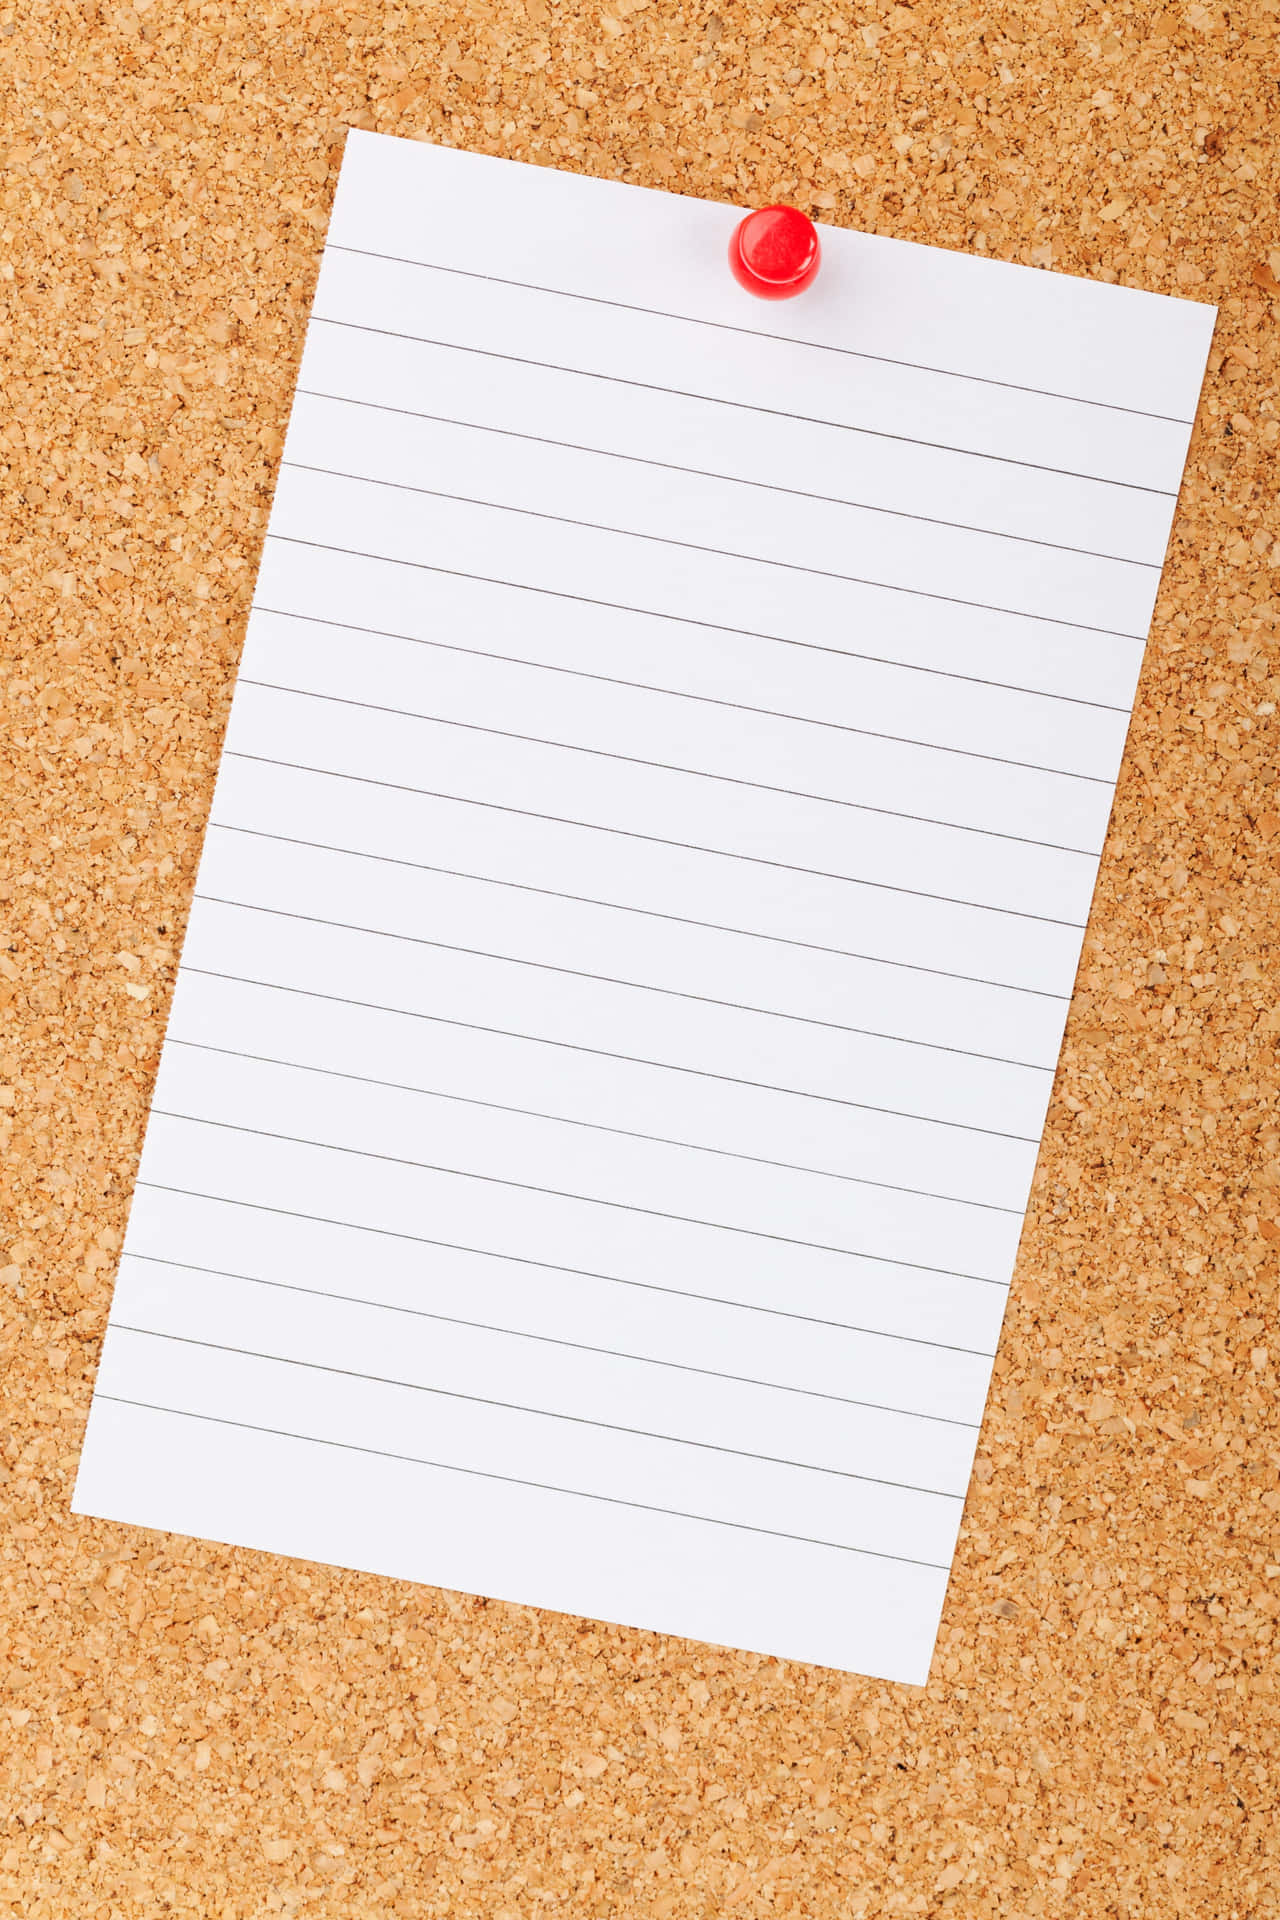 Cork Pinned Lined Paper Background For Mobile Phone